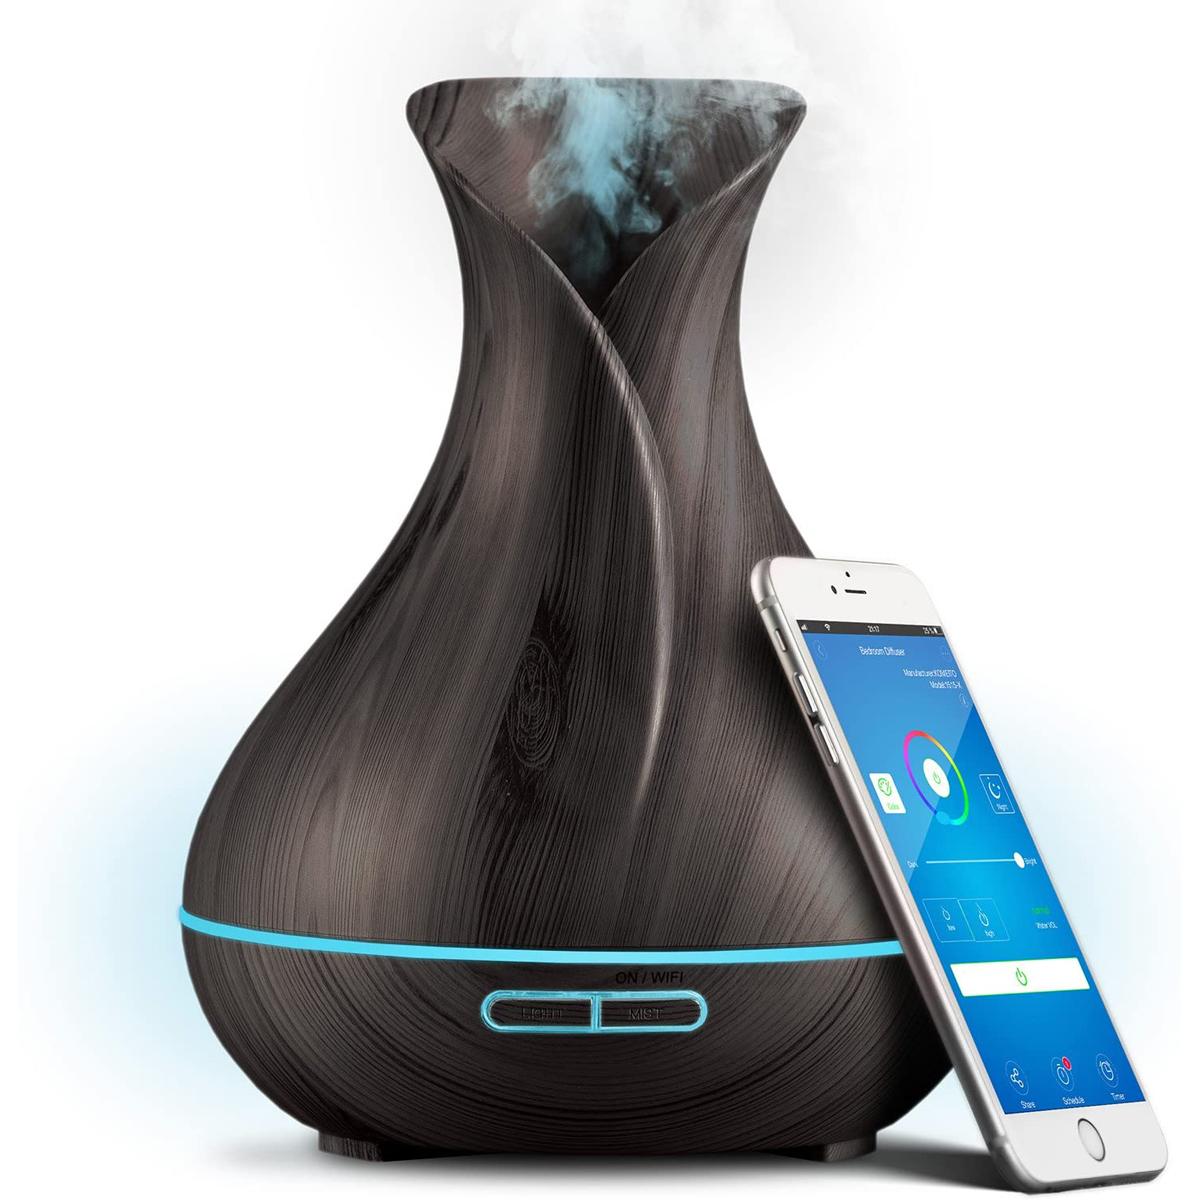 Smart WiFi Wireless Essential Oil Diffuser Humidifier for $25.57 Shipped